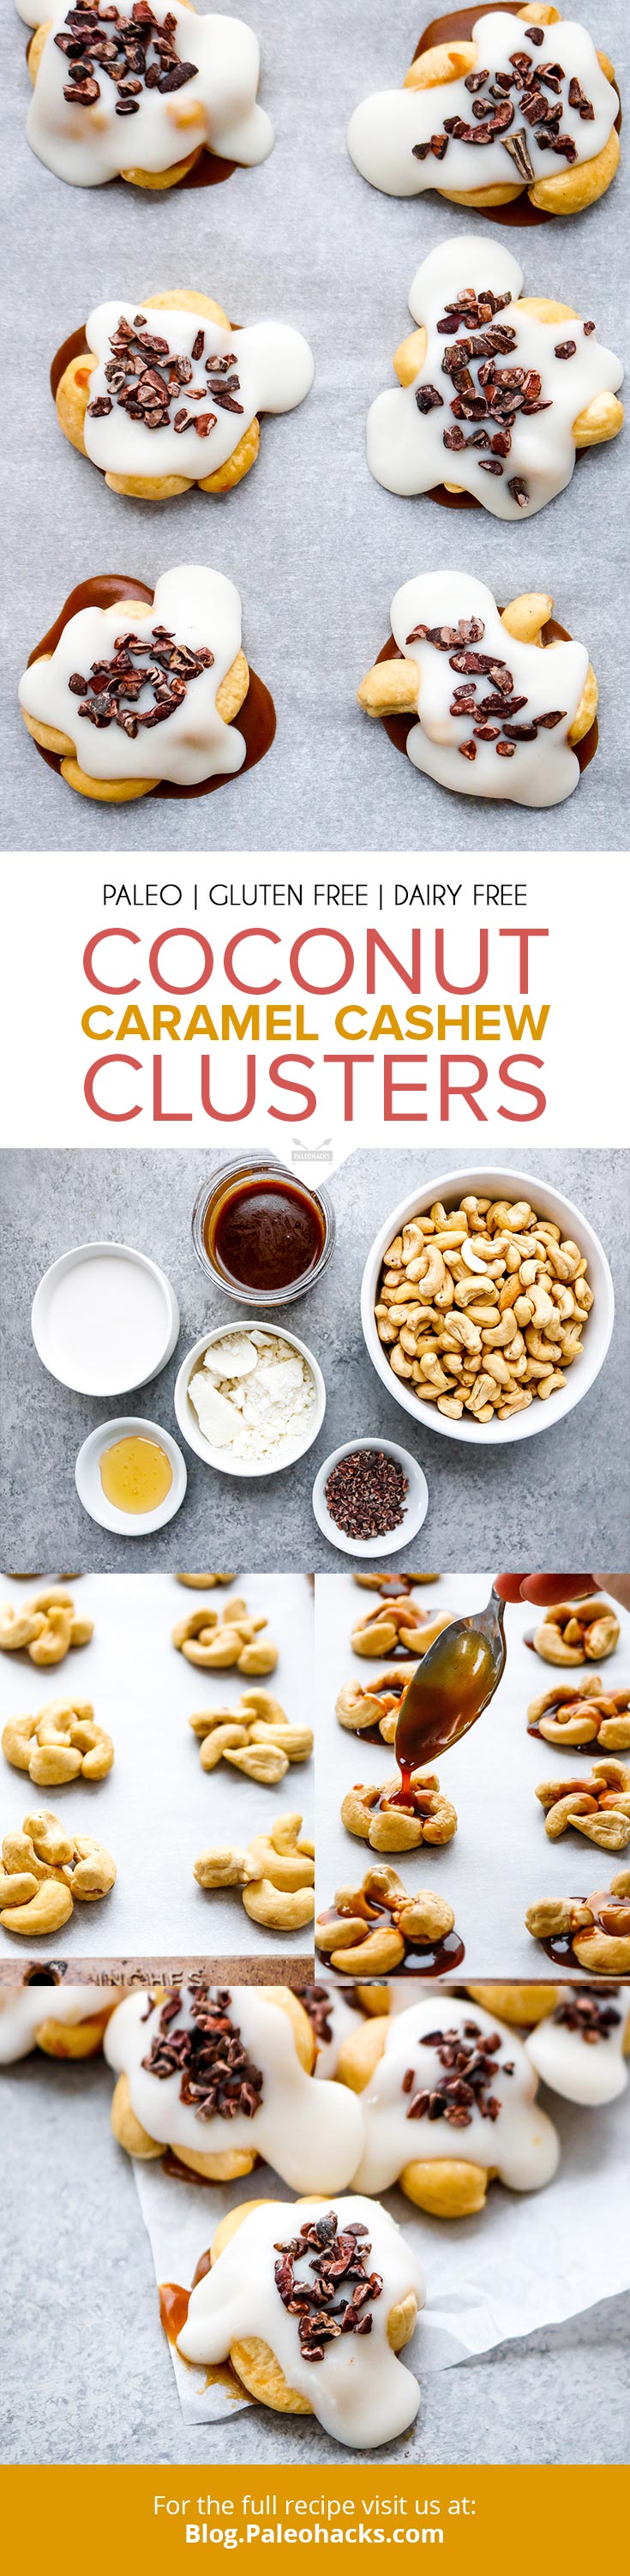 Nestle crunchy clusters of cashews with layers of Paleo caramel and “white chocolate” to calm all your snacking needs. Bringing the yum-factor to new heights!